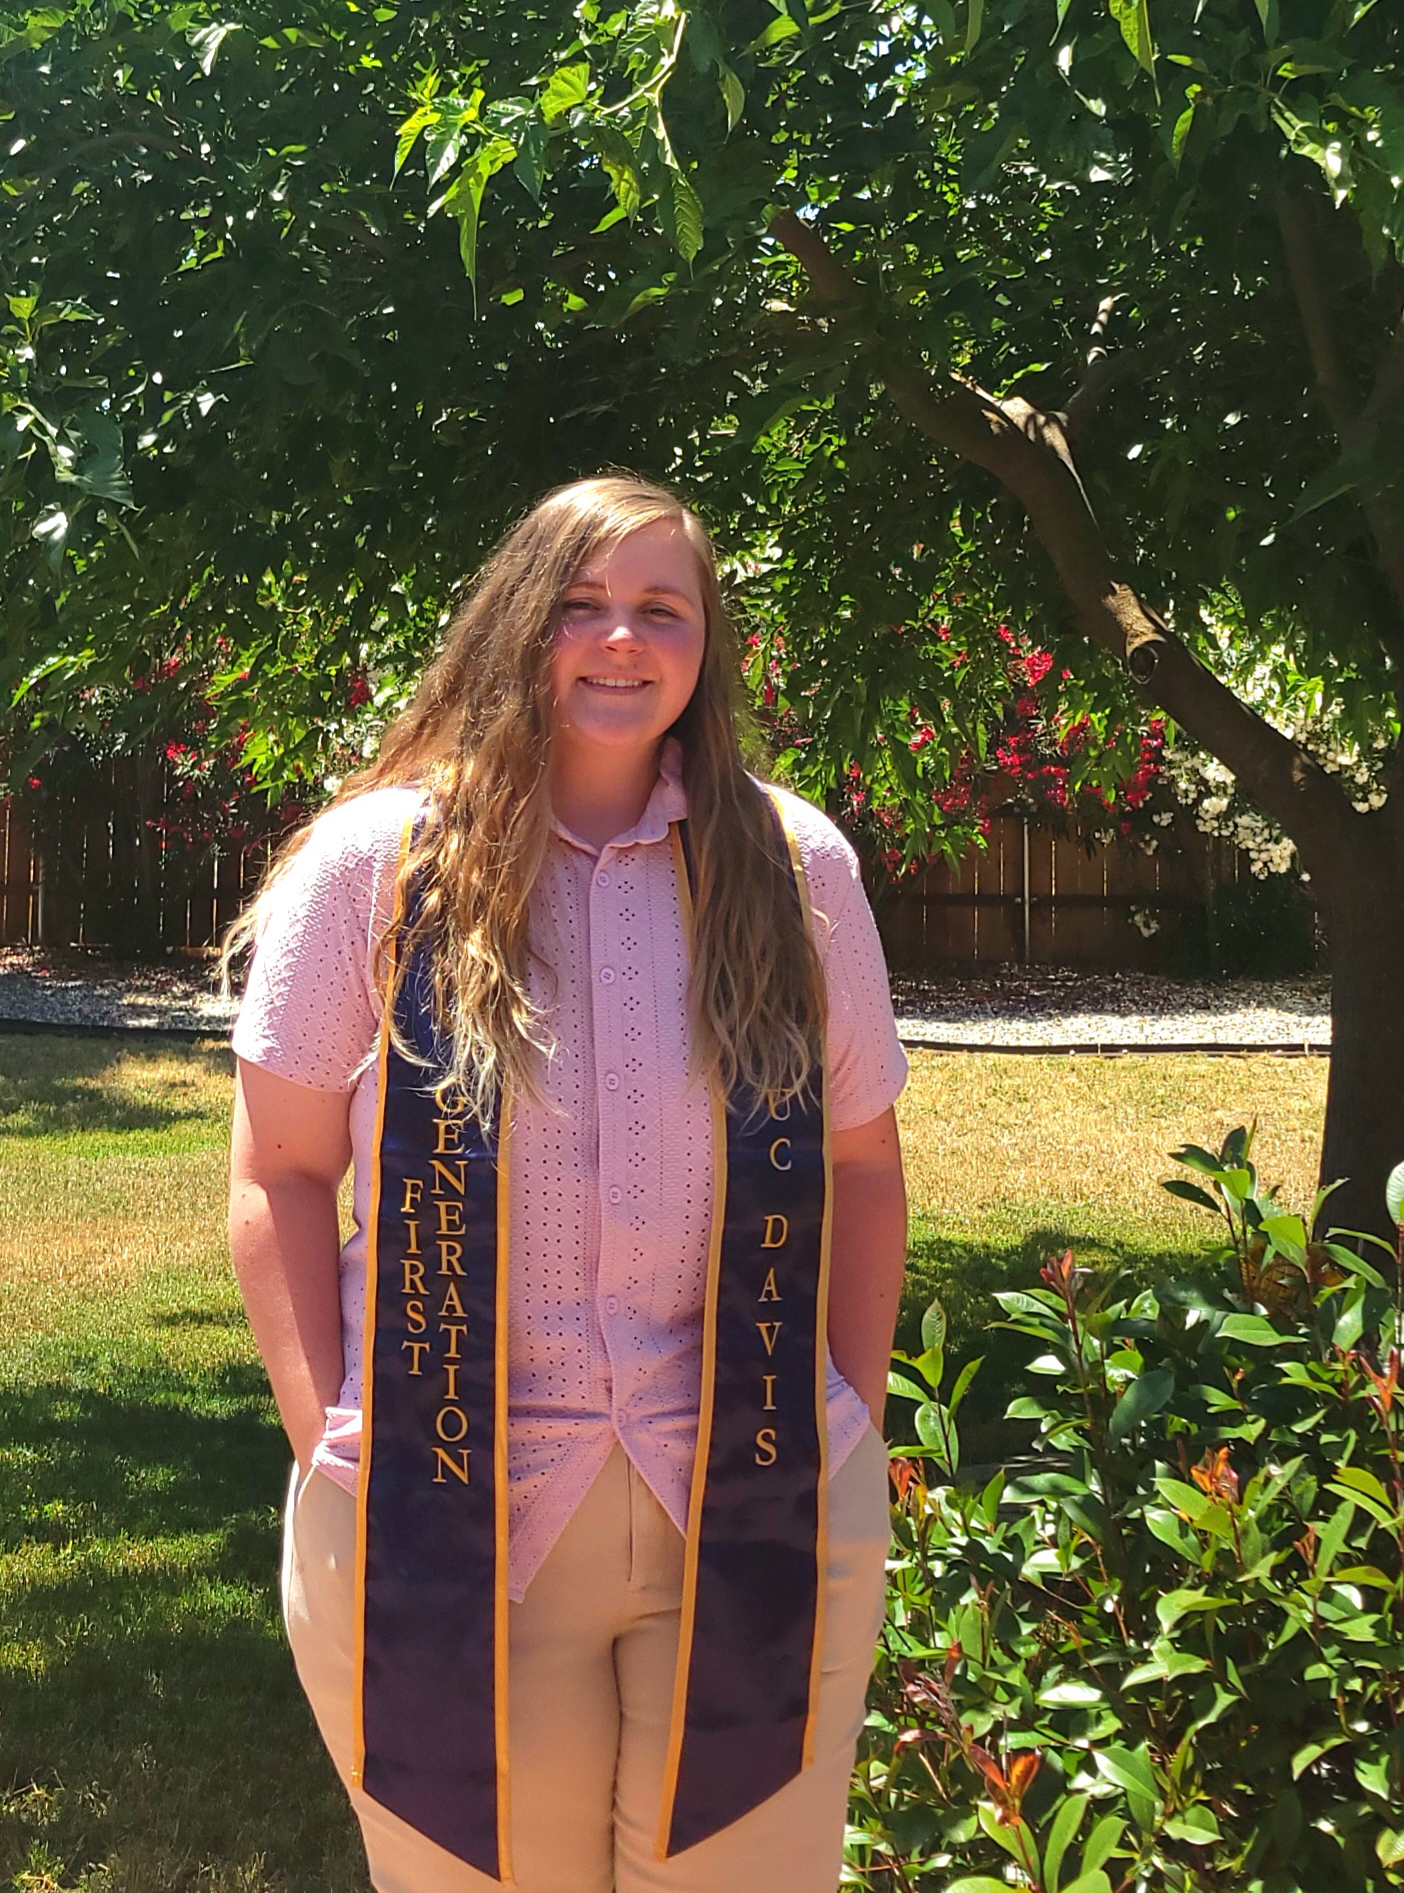 A graduation photo of Oceanna Warnock, wearing a white shirt and gold and blue UC Davis stole, posing in front of background greenery.